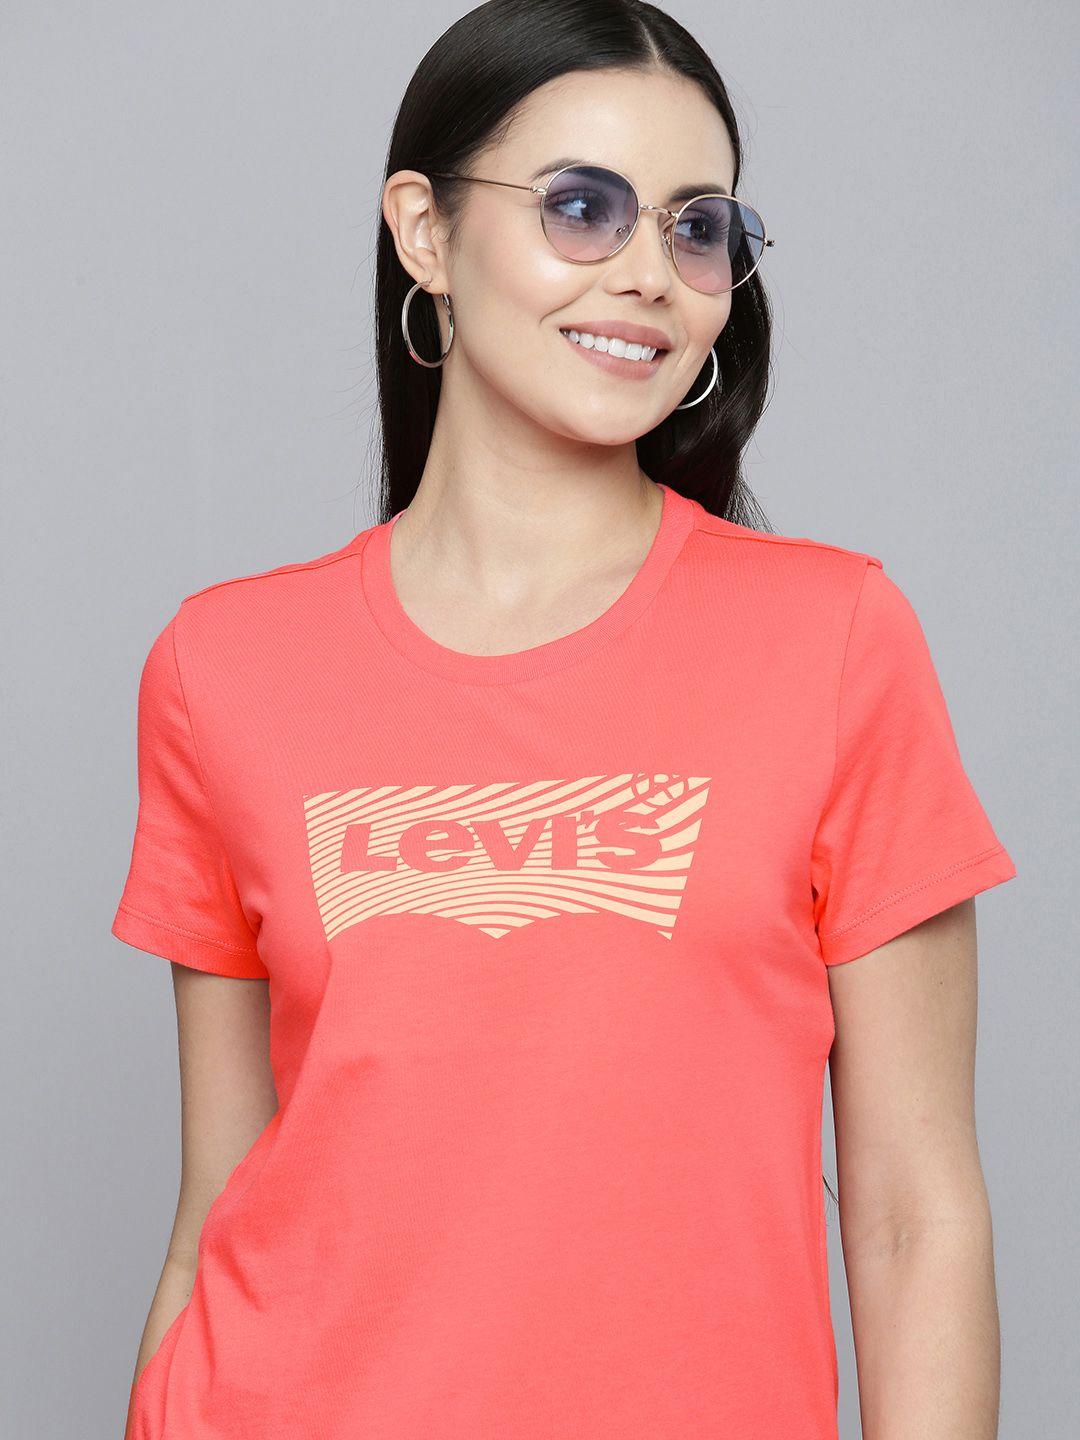 levis women coral pink brand logo printed pure cotton casual t-shirt